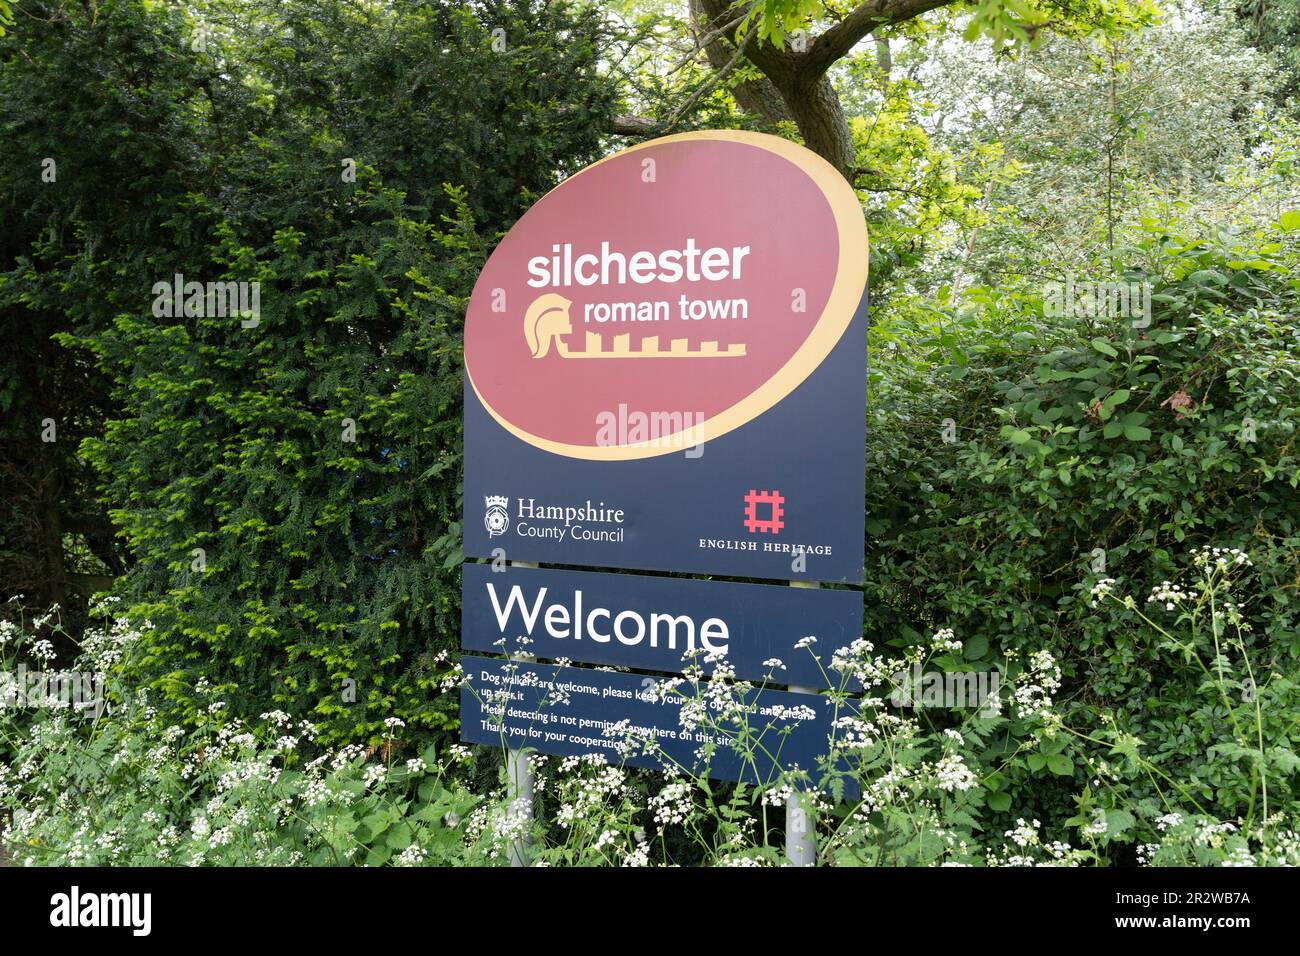 Hampshire County Council und English Heritage Welcome to Silchester Roman Town Schild. Silchester, Hampshire, England Stockfoto